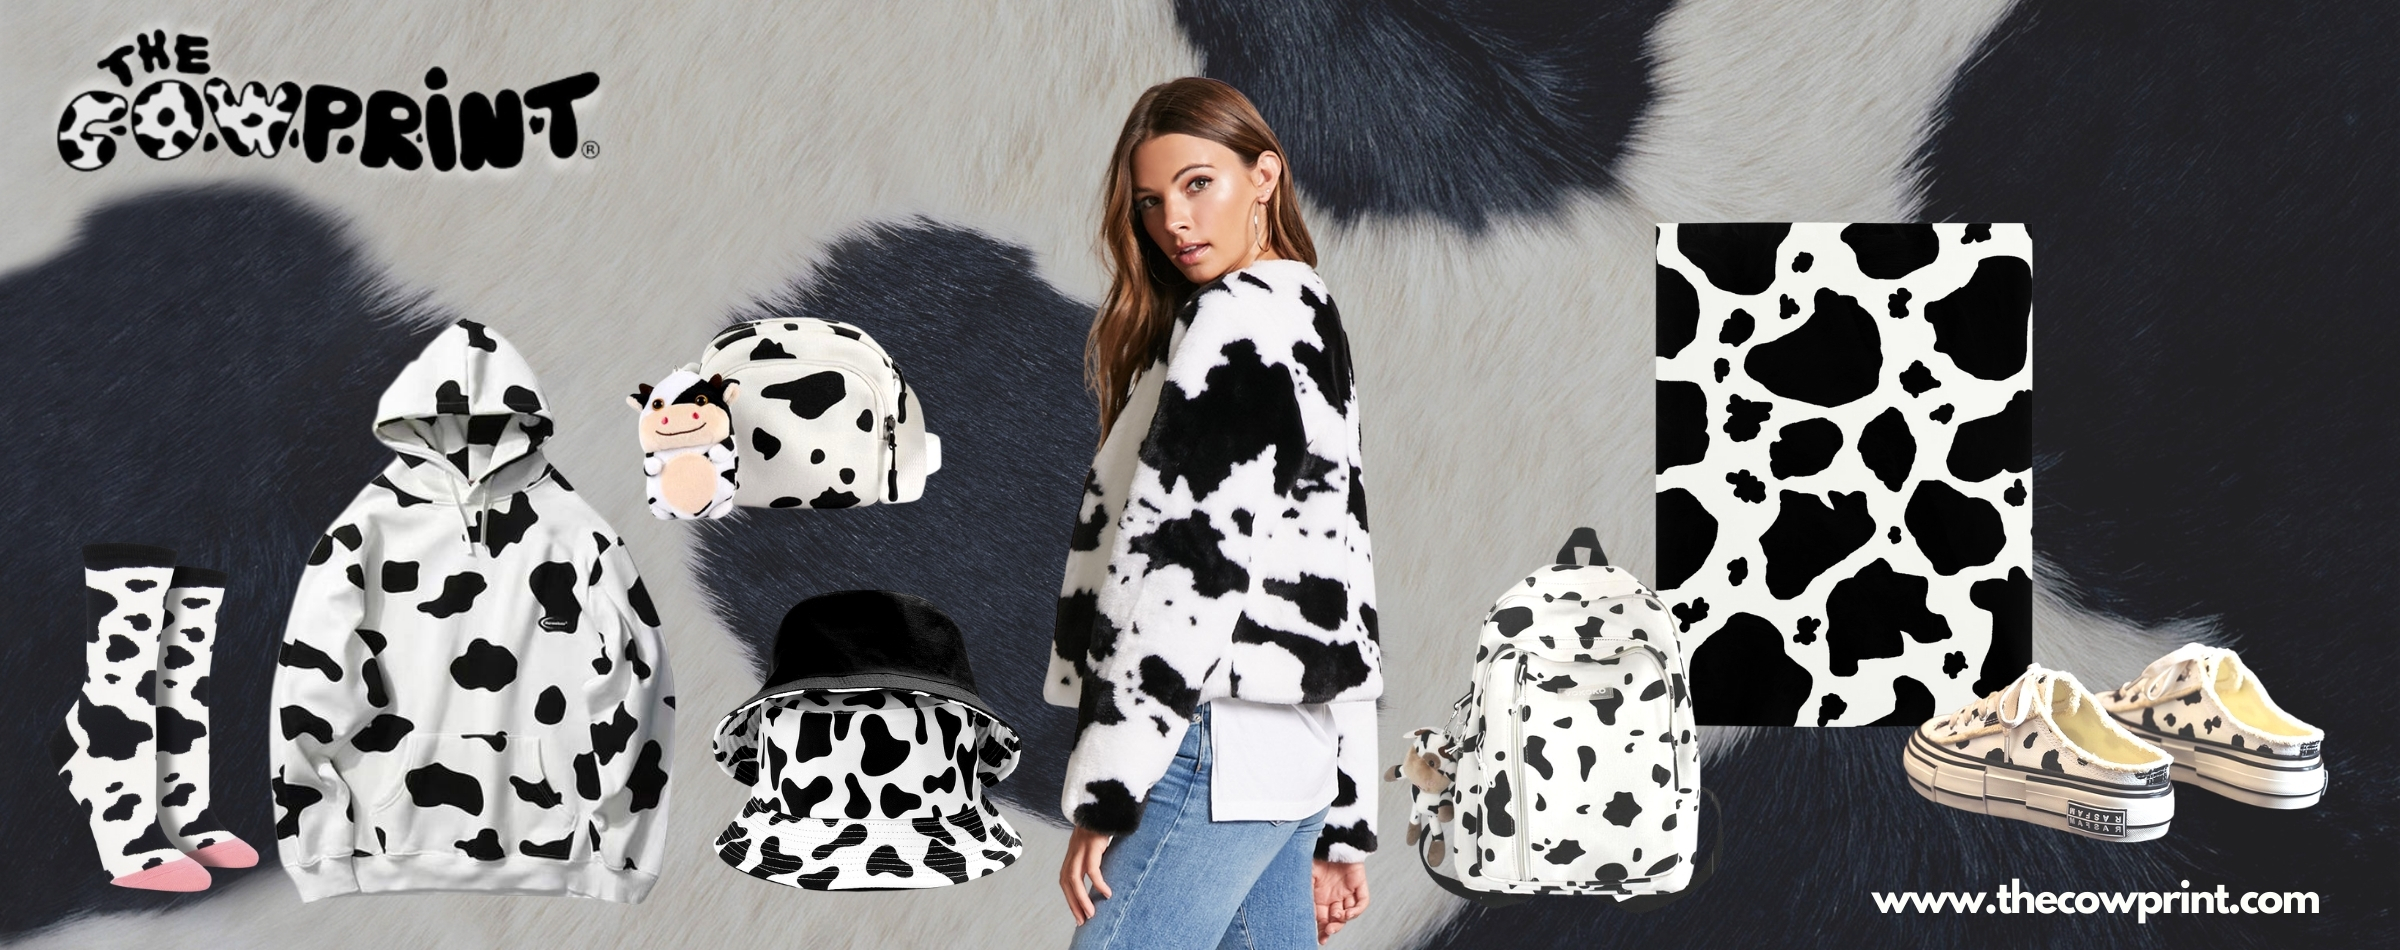 The Cow Print Web Banner - The Cow Print